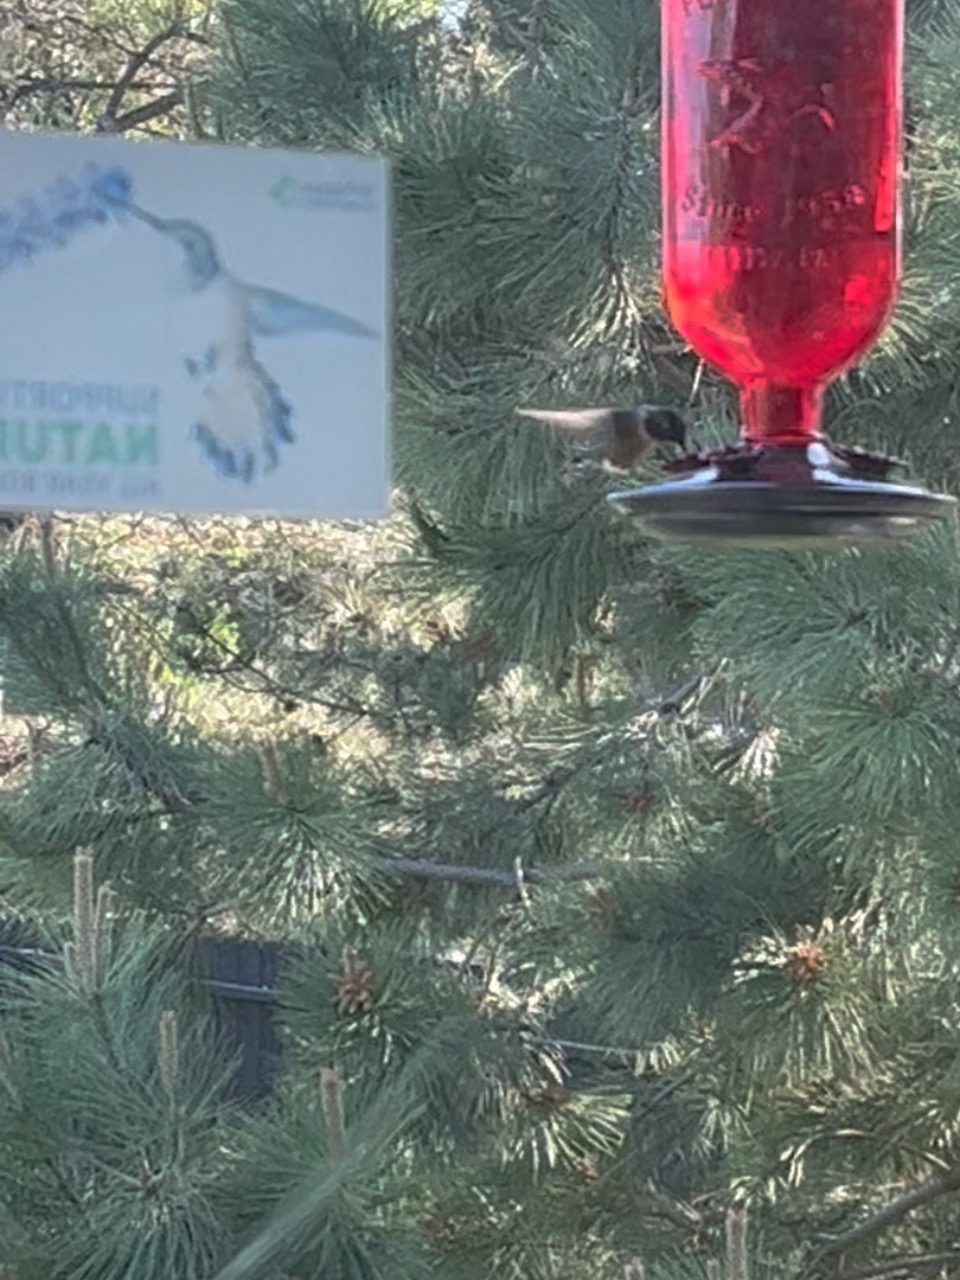 A hummingbird, photographed from a window, on a red hanging feeder